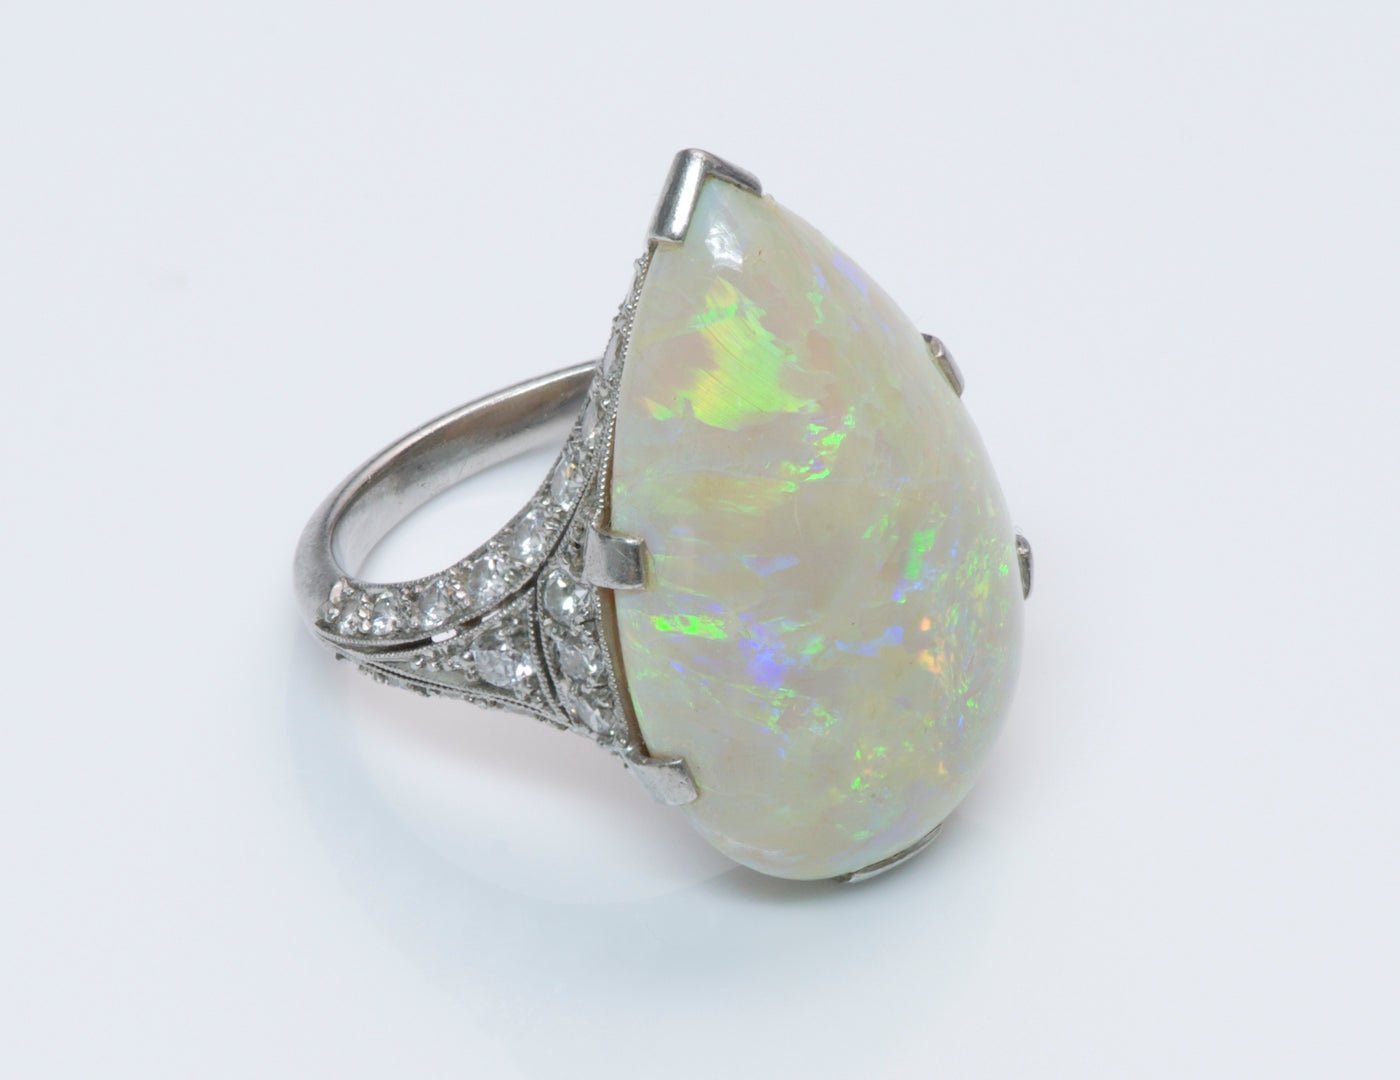 Antique Edwardian Opal and Diamond Gold Ring - DSF Antique Jewelry